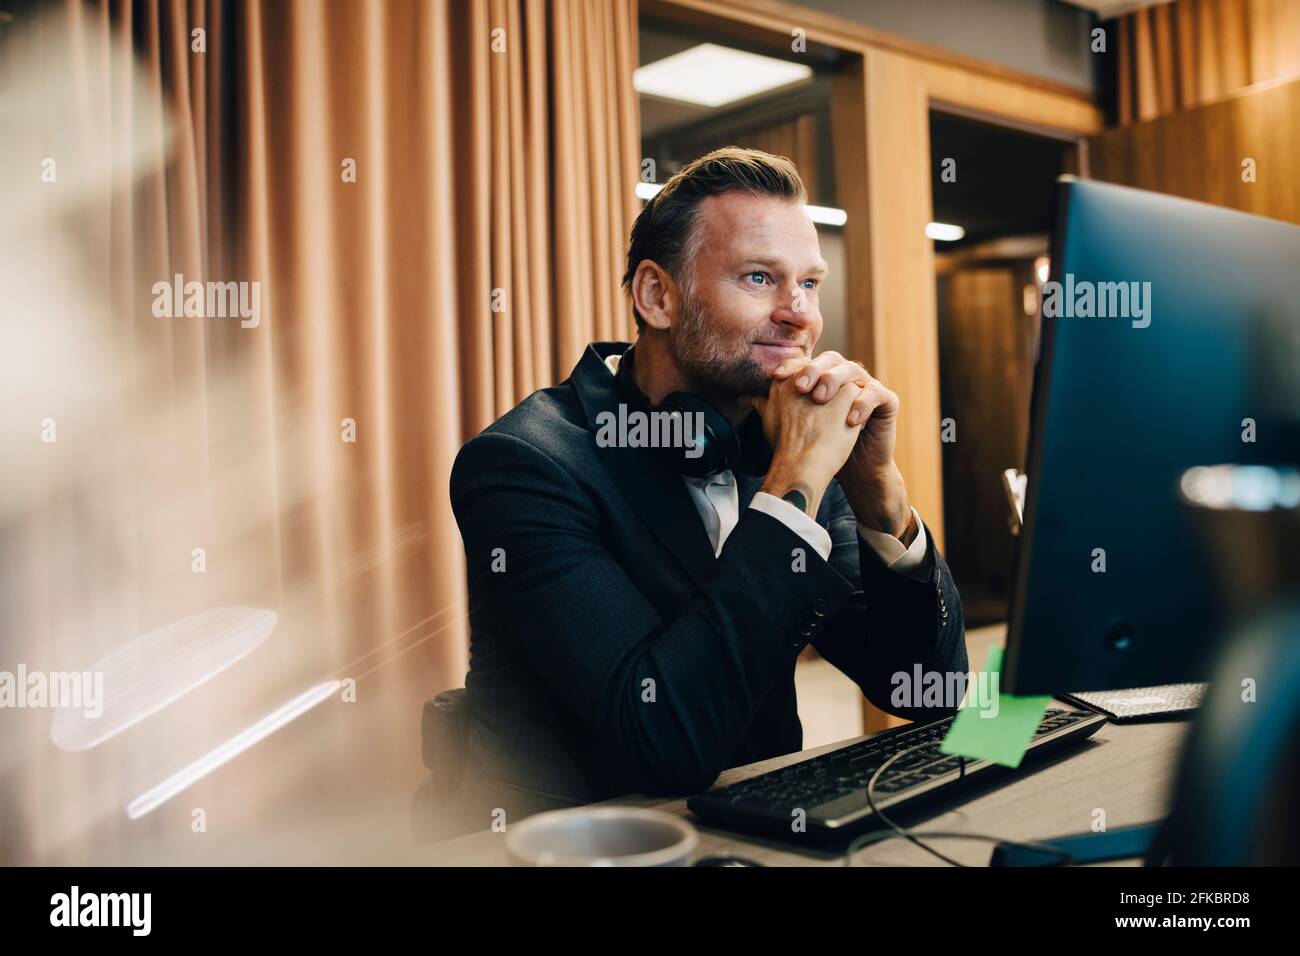 Smiling male entrepreneur with hand on chin working over laptop in office Stock Photo